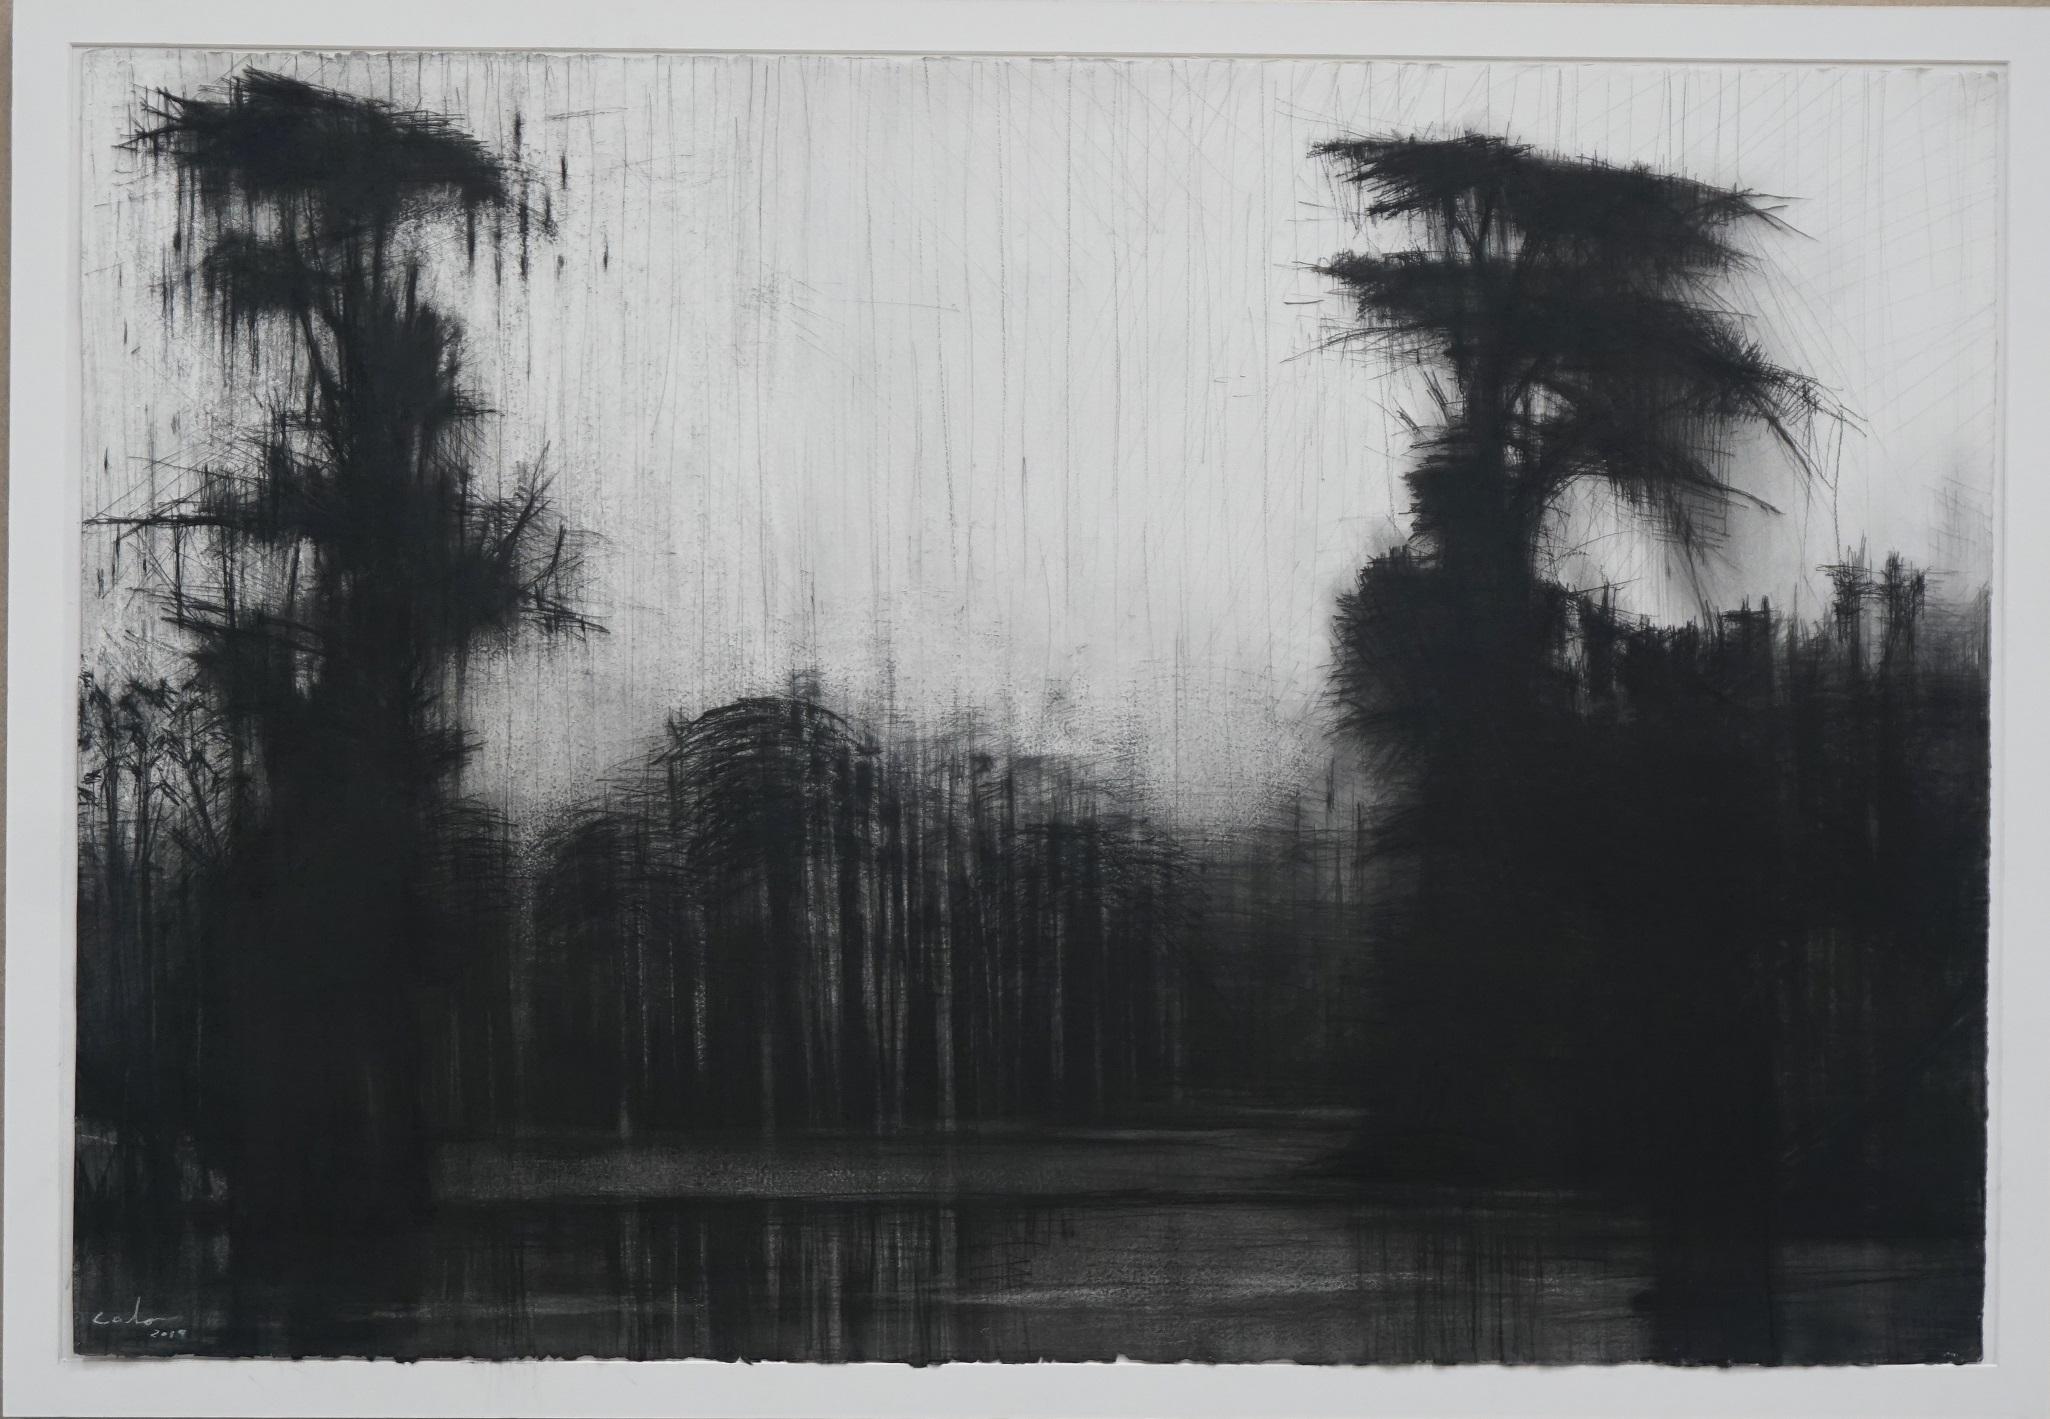 Rio Itaya no. 2, Jungle series - Tropical Forest Landscape - Painting by Calo Carratalá